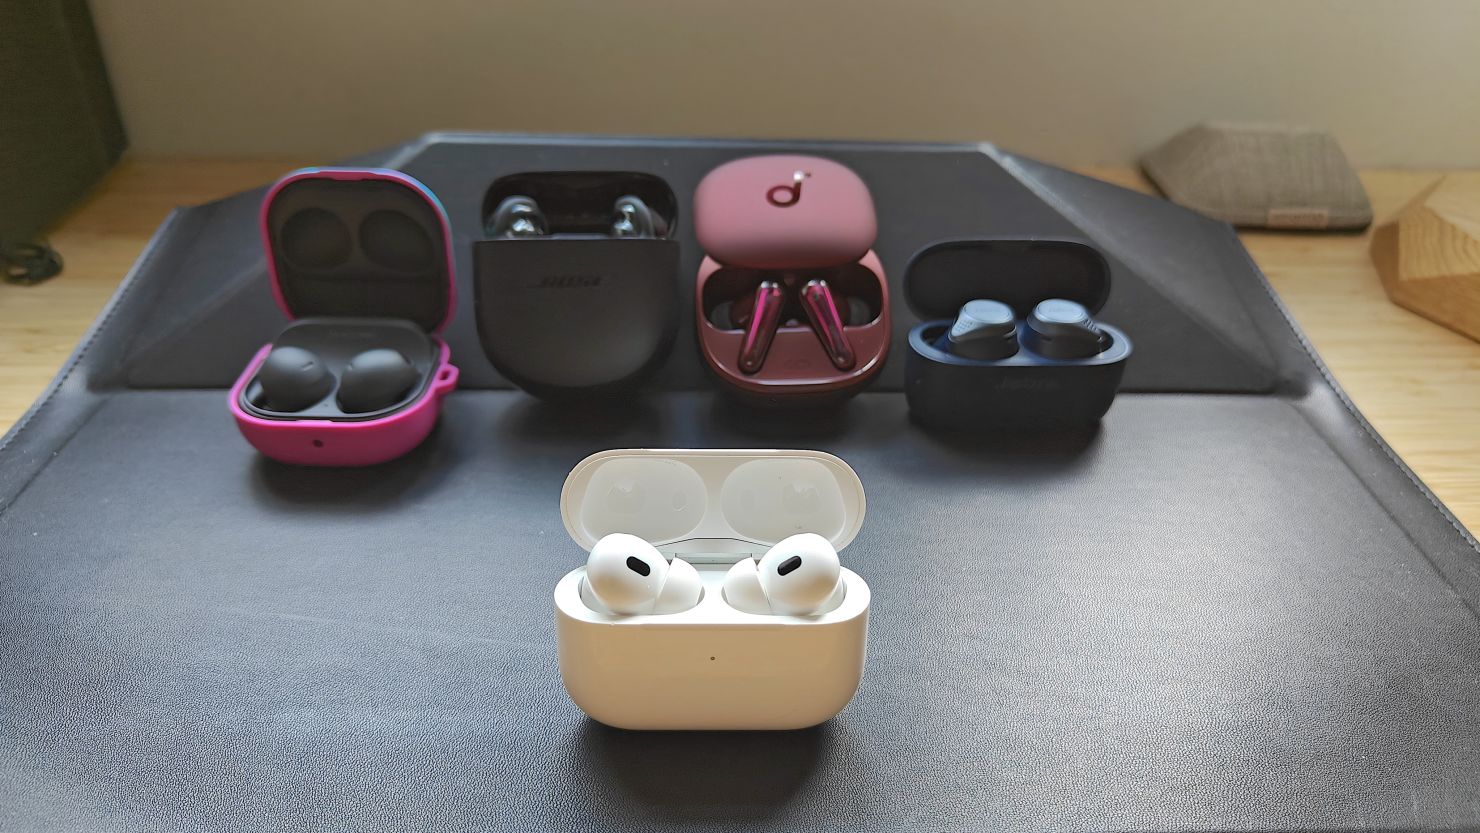 Nothing Ear 2 review: The only Apple AirPods rivals that matter